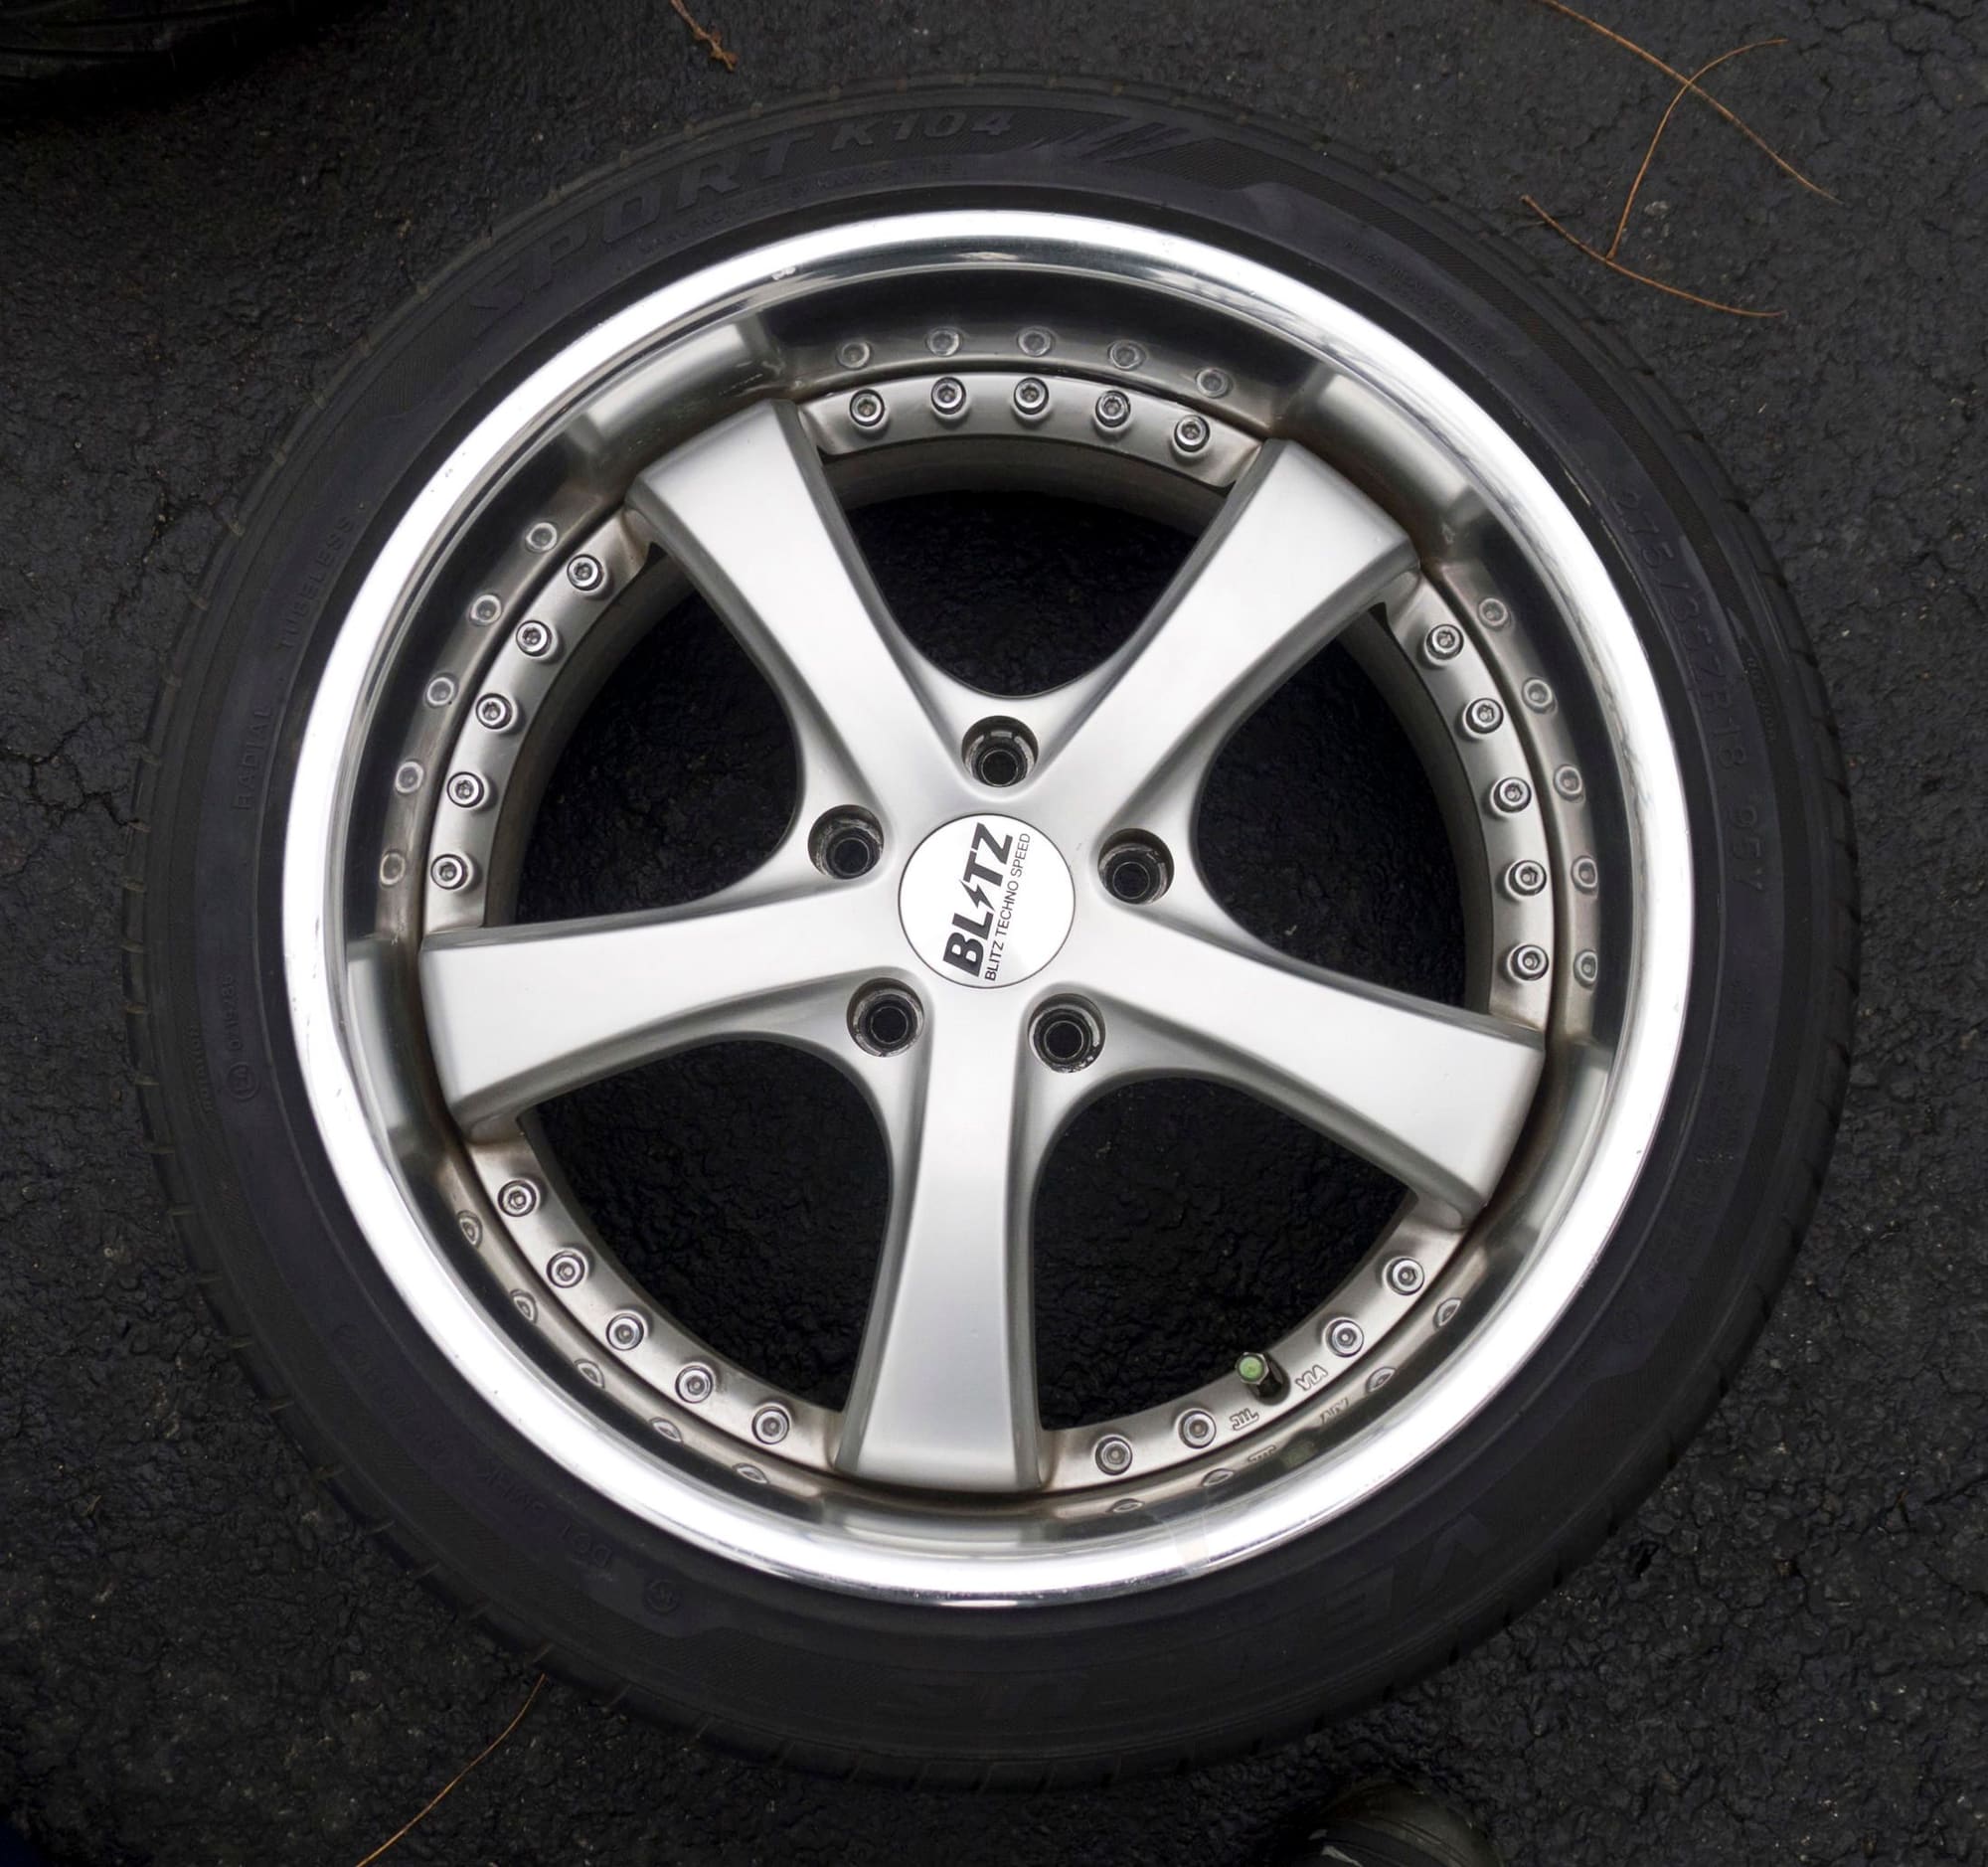 Wheels and Tires/Axles - 18" Blitz TechnoSpeed Z2 wheels & tires - Used - 1992 to 2000 Lexus SC300 - 1992 to 2000 Lexus SC400 - 1993 to 1998 Toyota Supra - Lombard, IL 60148, United States